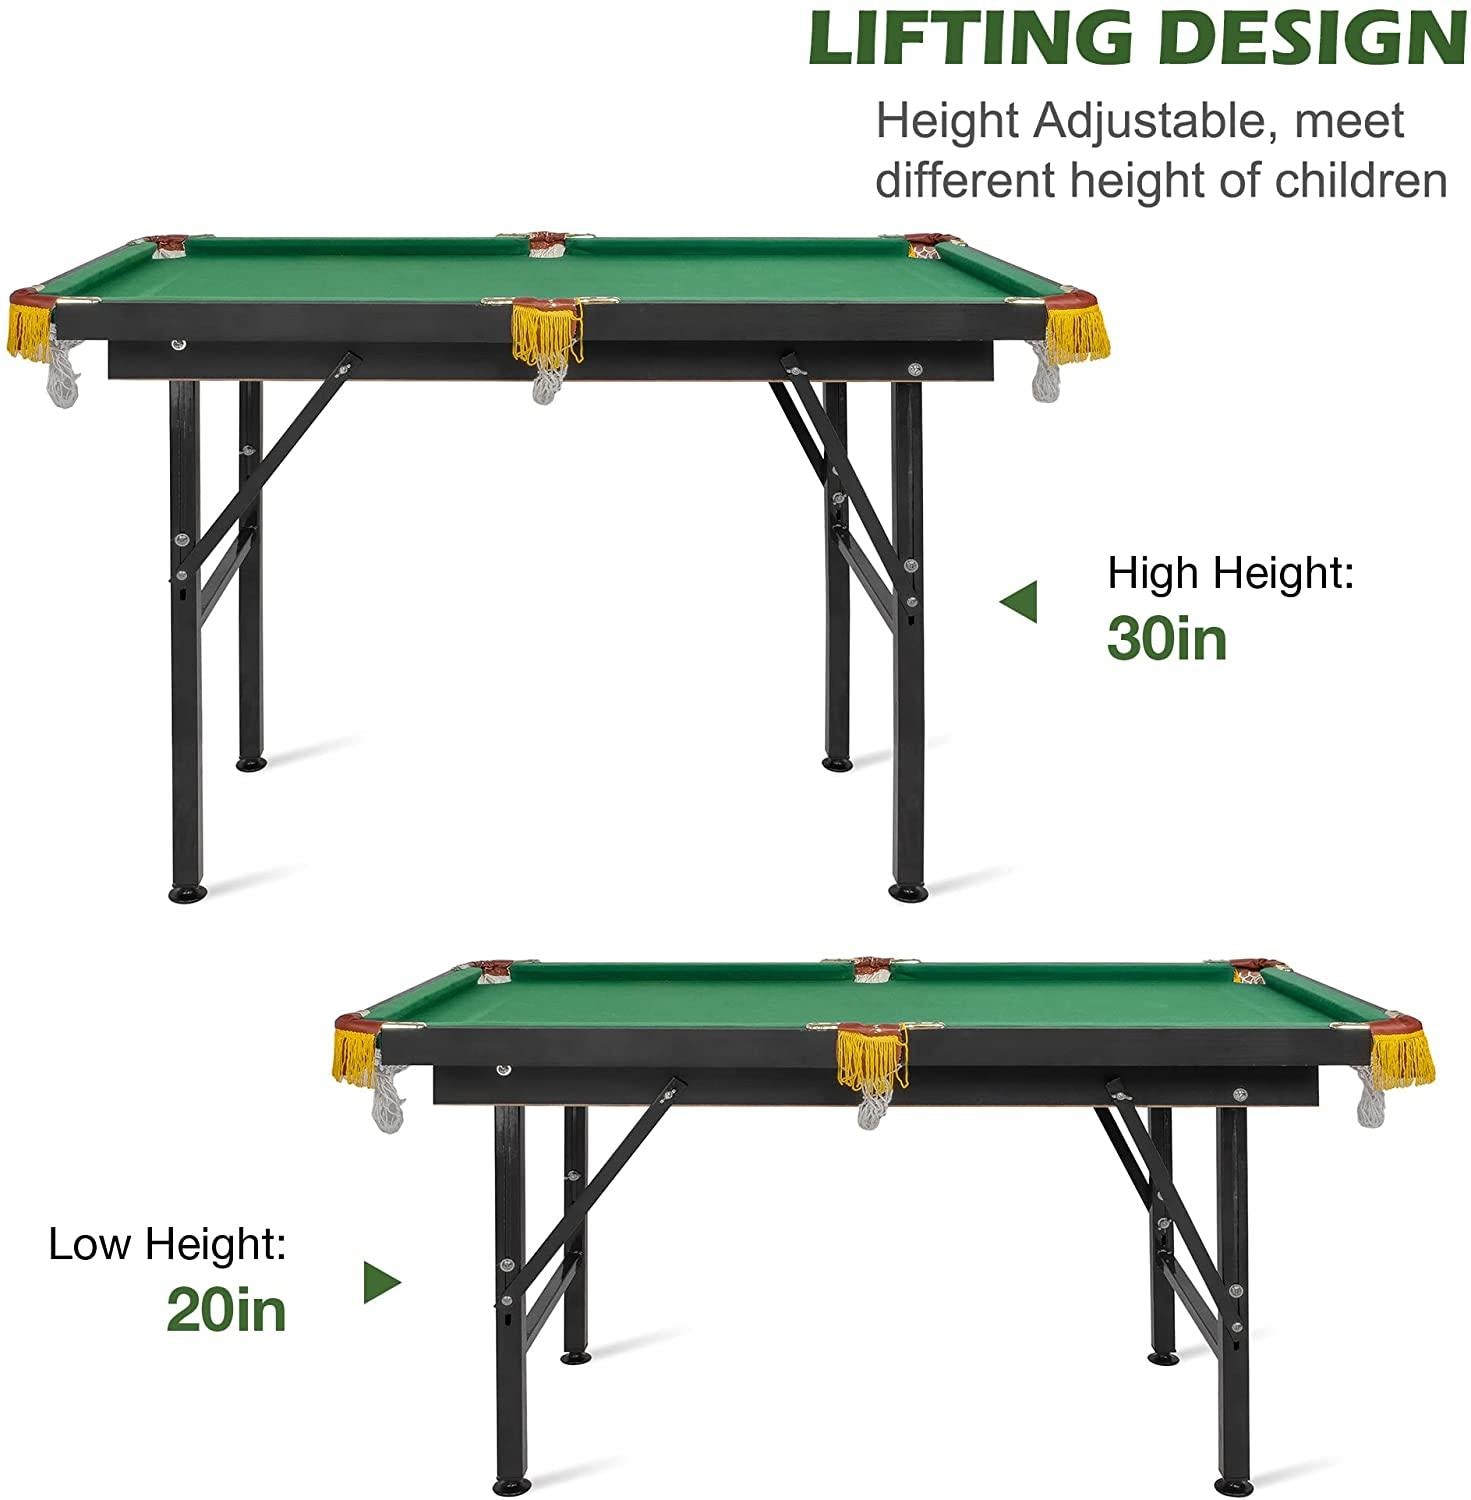 47" Folding Portable Billiard Table for Kids and Family - Pool Game Table with Cues, Balls, Chalk, Cleaning Brush, Tripod - Home or Office Play Fun - Bosonshop